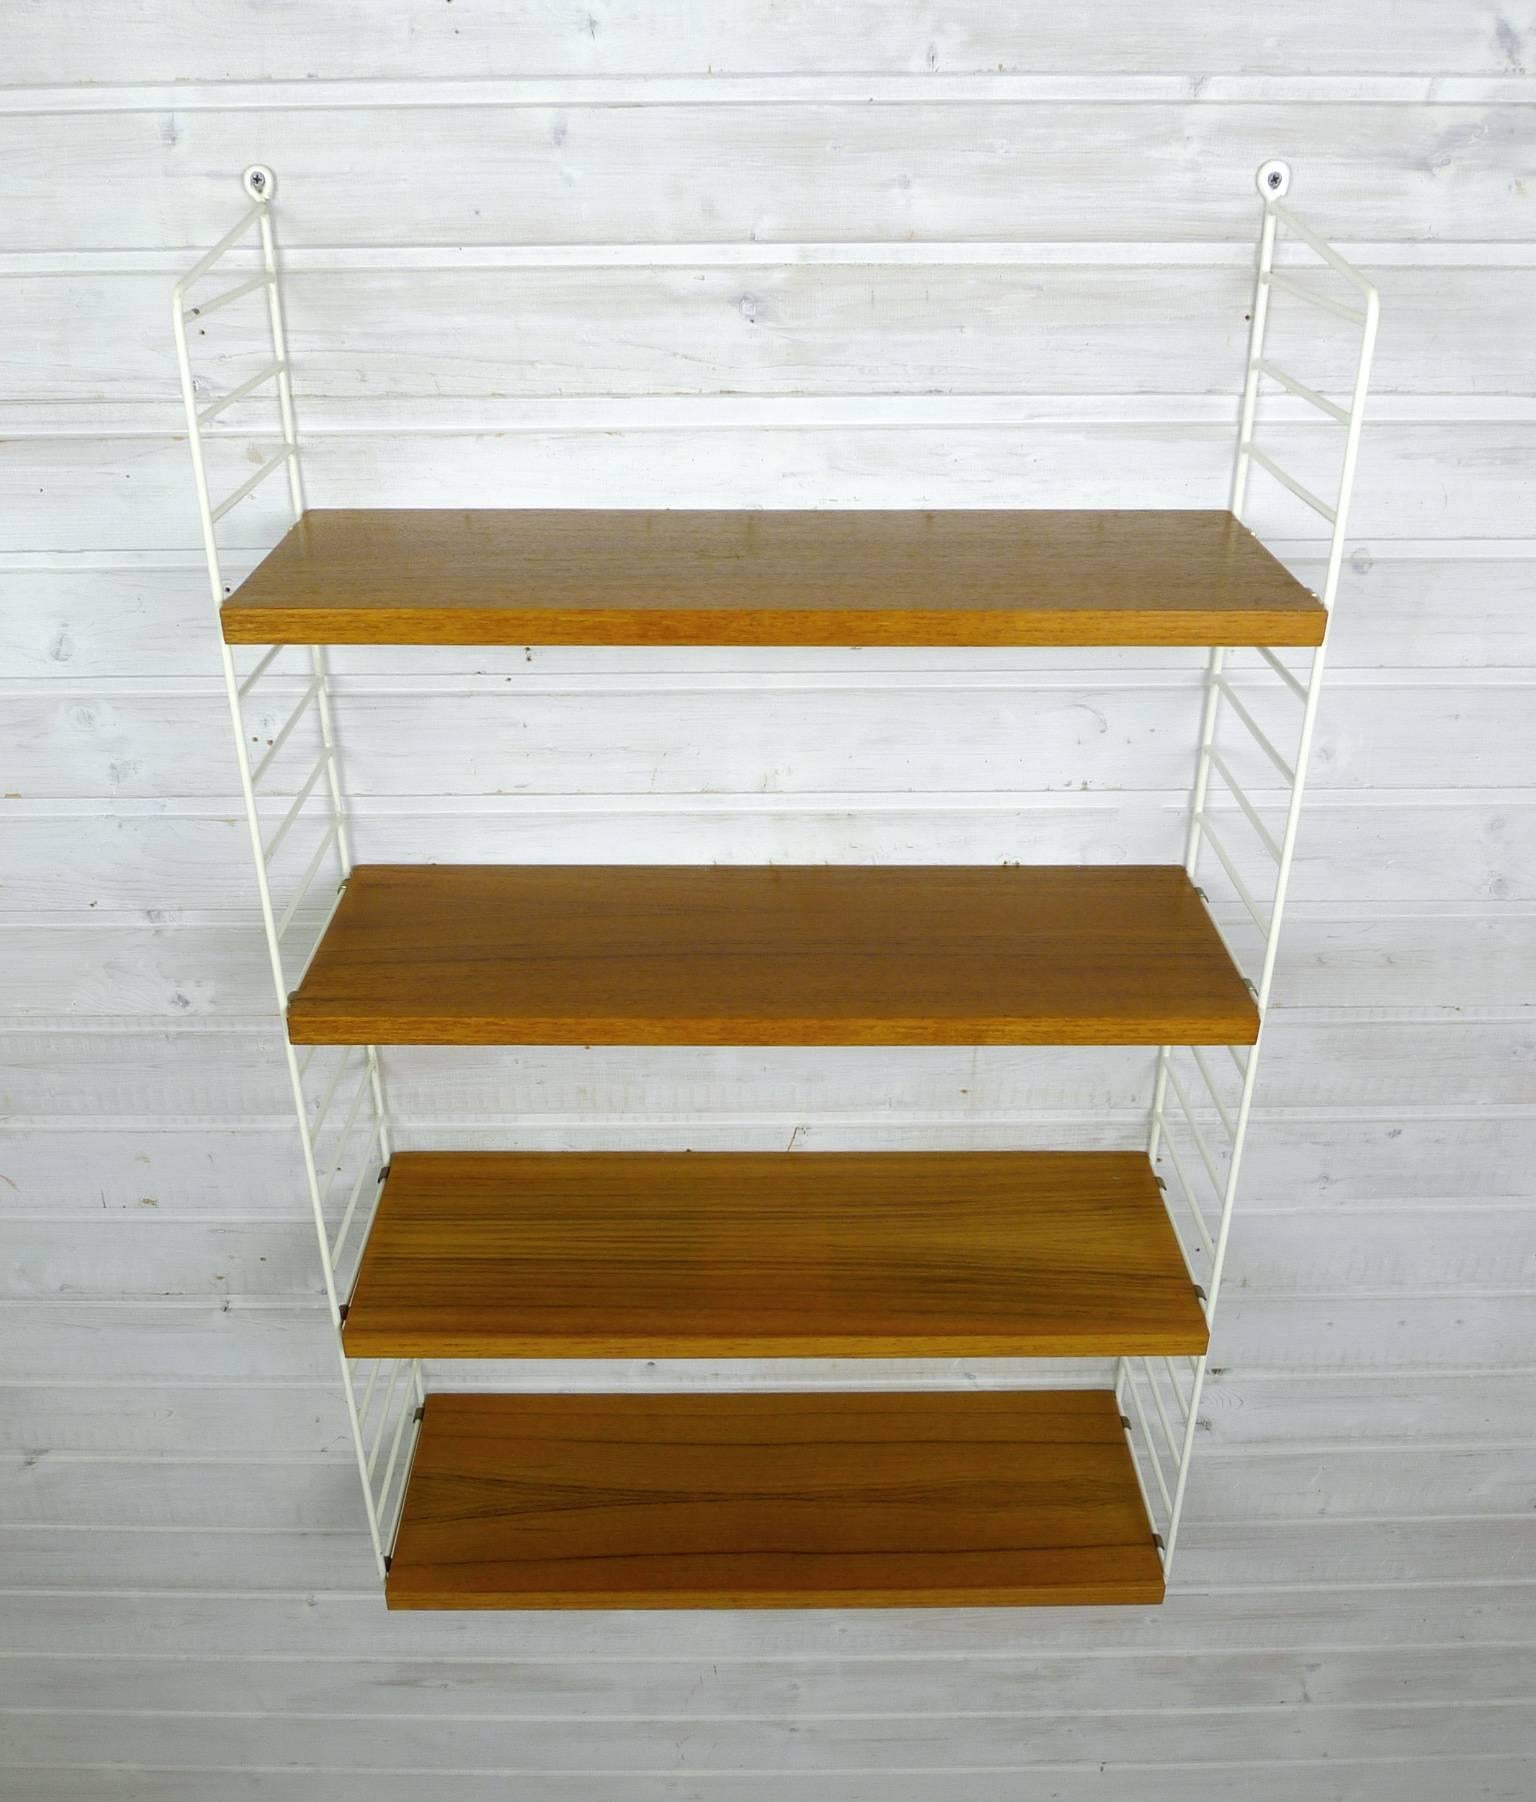 Nisse Strinning designed his famous shelf system in 1949. It was produced in his own company String Design AB in Sweden. 
This wall shelf consists of two white-coated ladders and four shelves in teak with a depth of 20 cm. The shelf is in a good